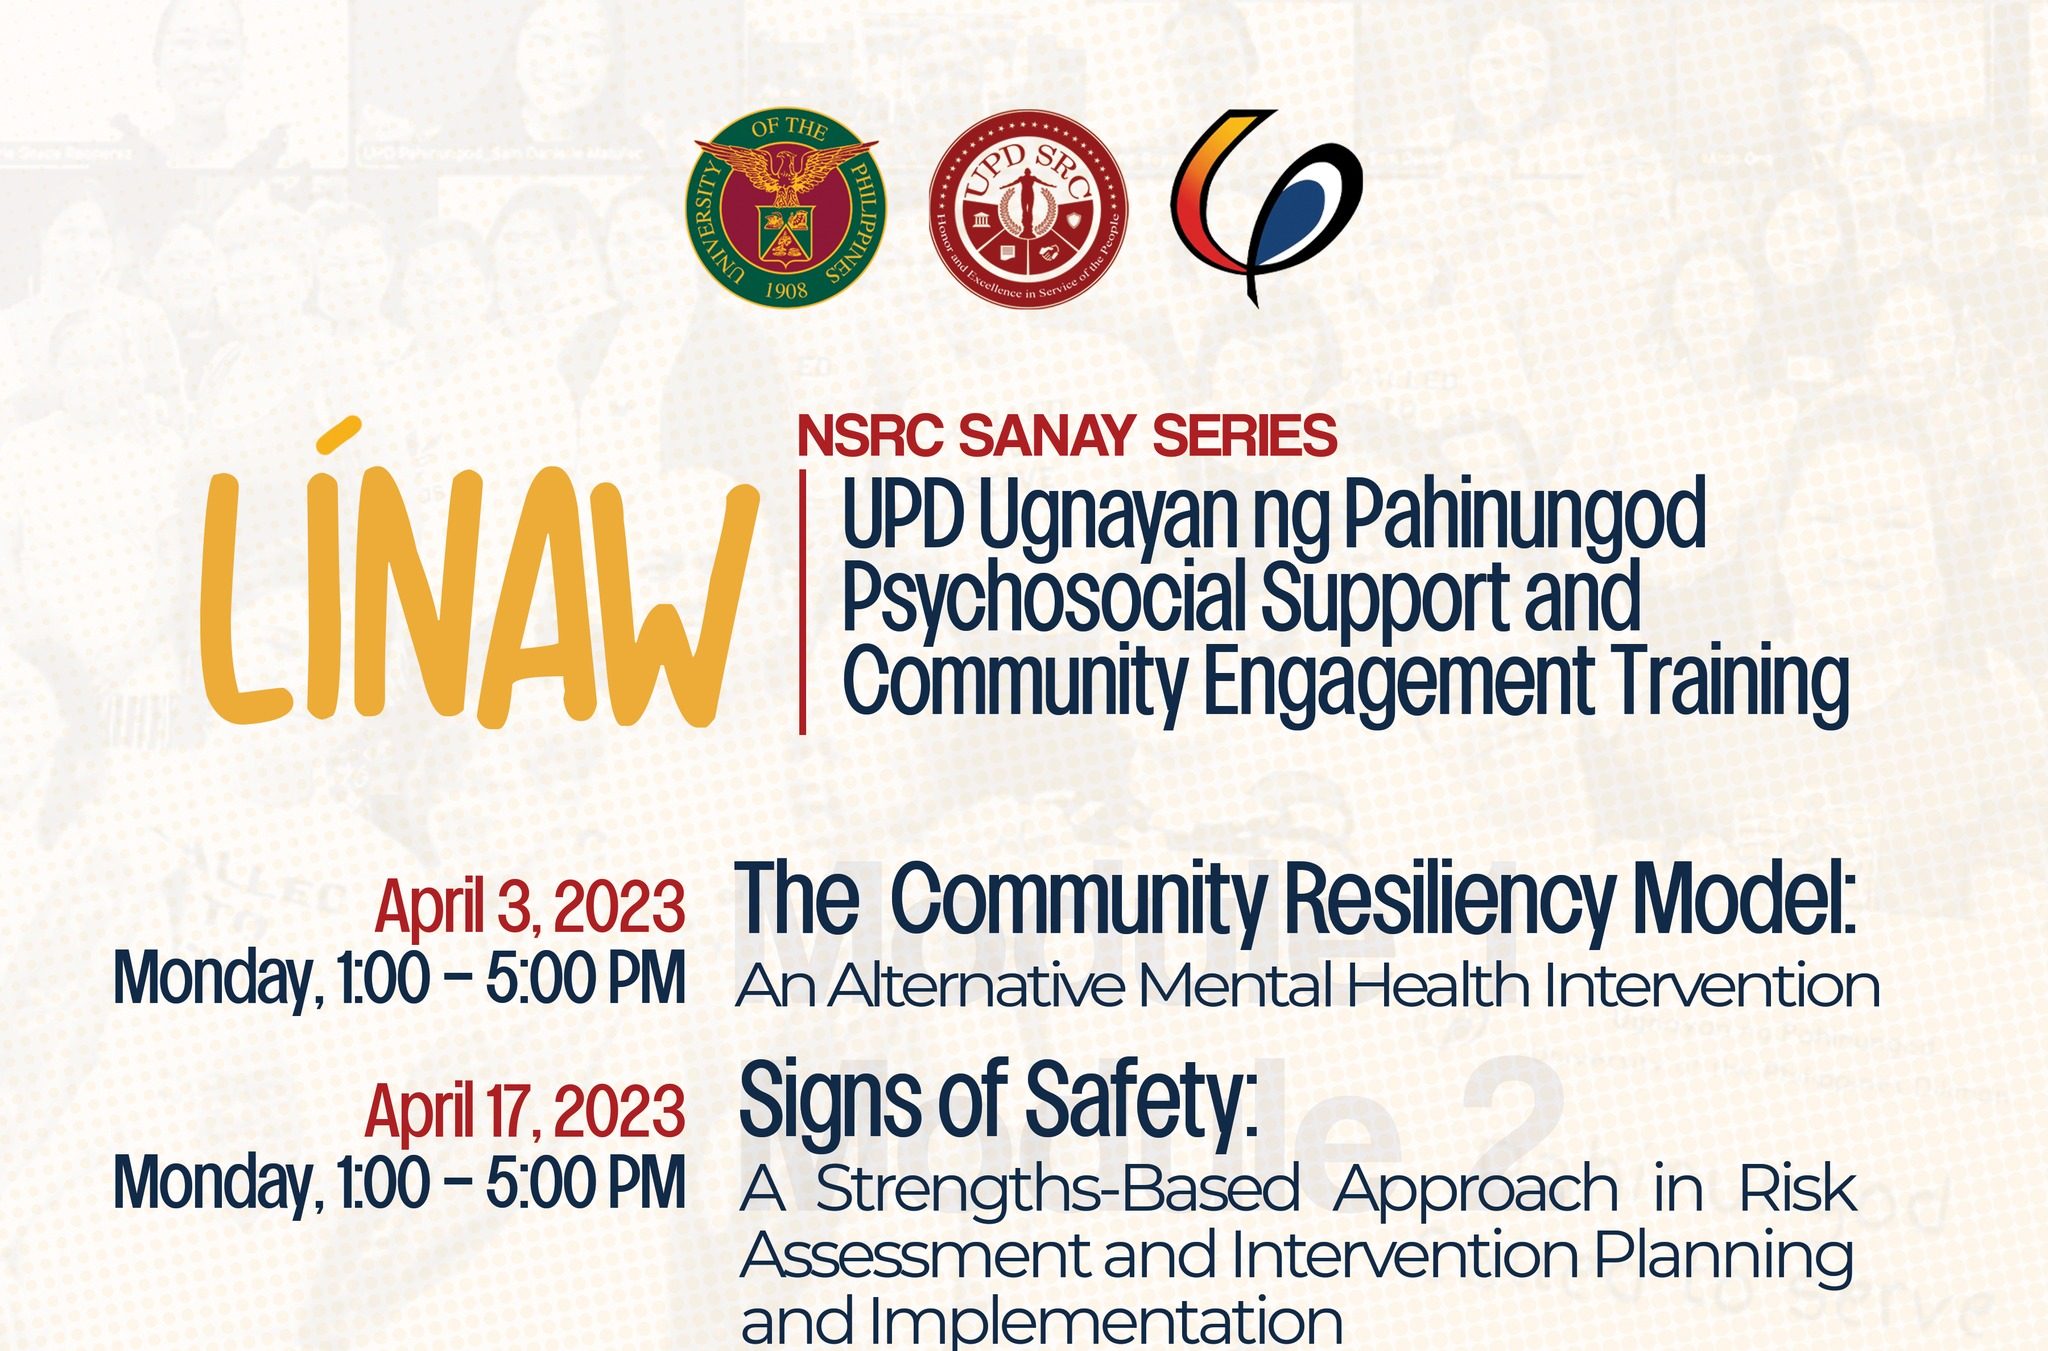 Línaw: UP Diliman (UPD) Ugnayan ng Pahinungod Psychosocial Support and Community Engagement Training